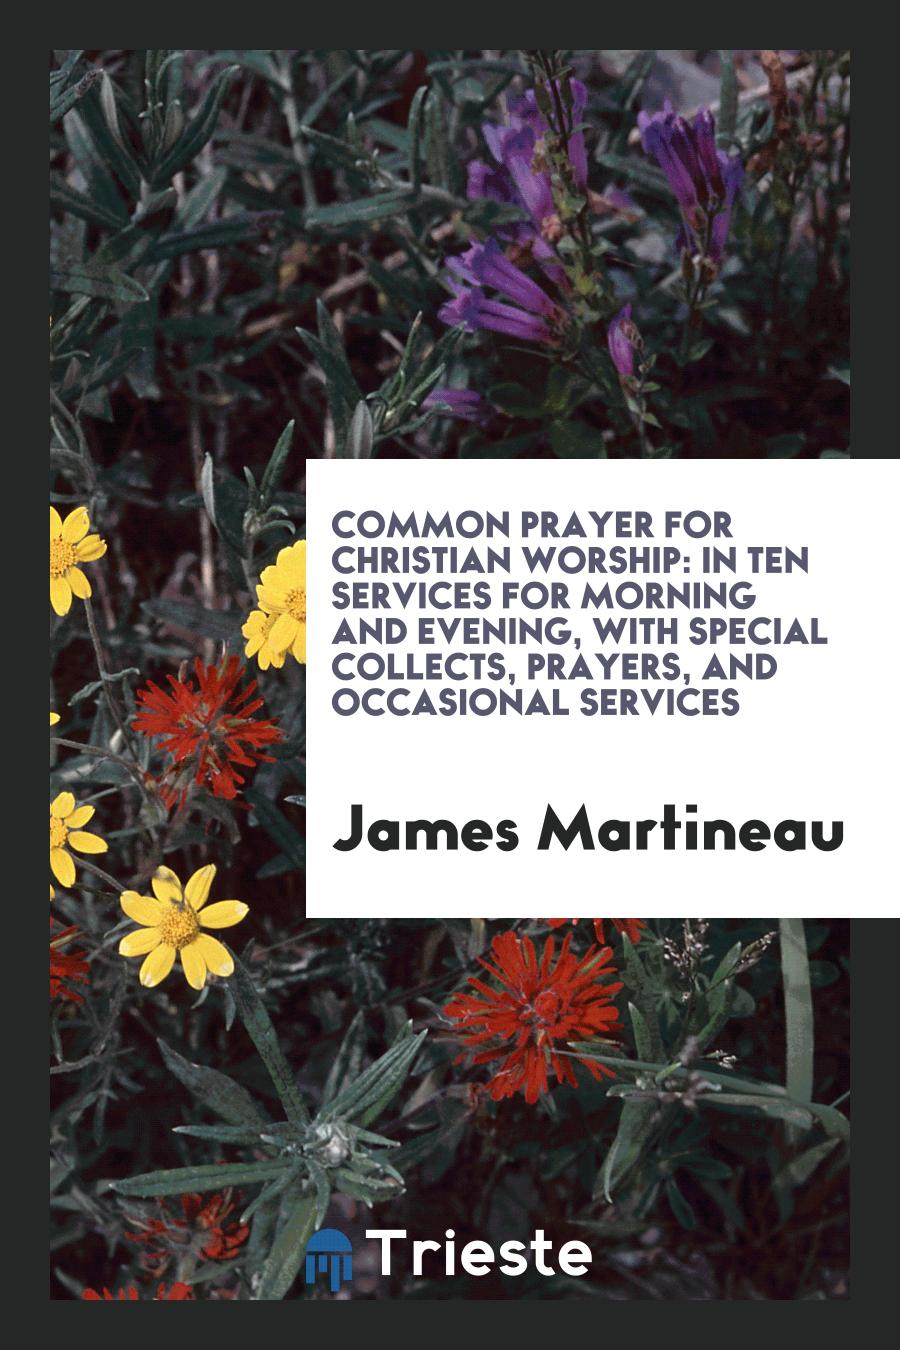 Common Prayer for Christian Worship: In Ten Services for Morning and Evening, with Special Collects, Prayers, and Occasional Services